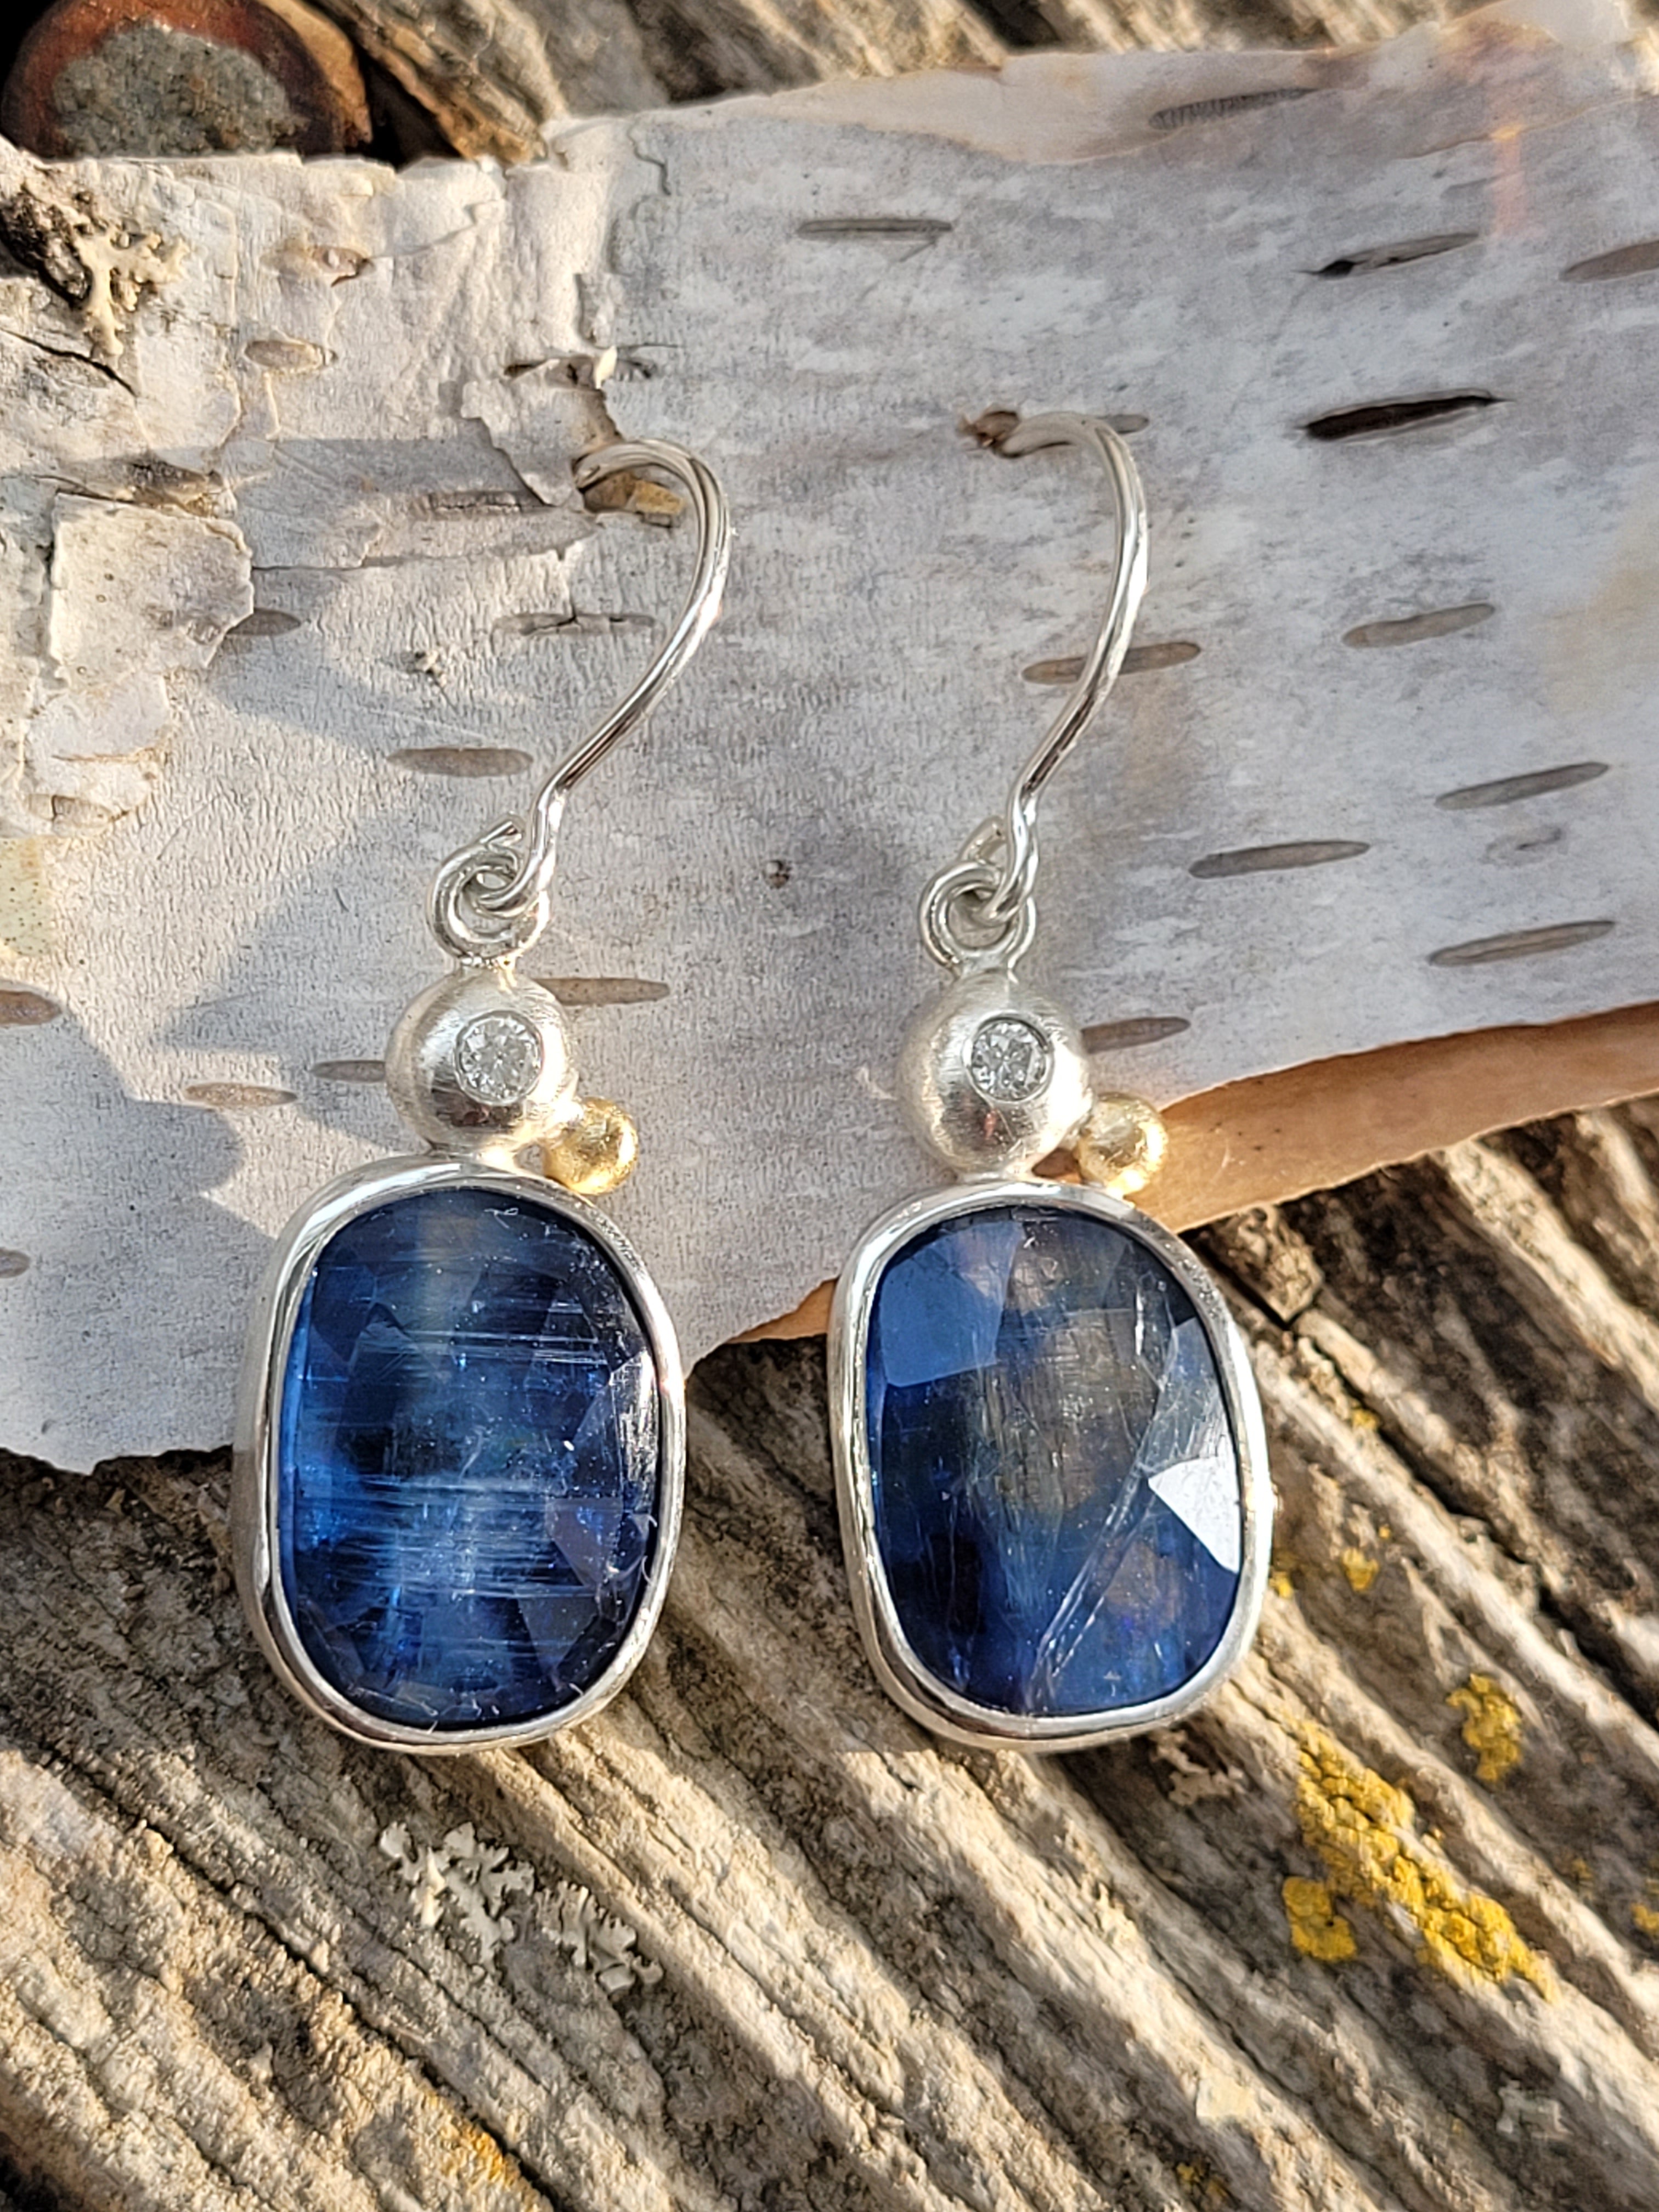 Blue Rose Cut Kyanite and diamond Earrings, Set in Sterling silver and 18k gold accent